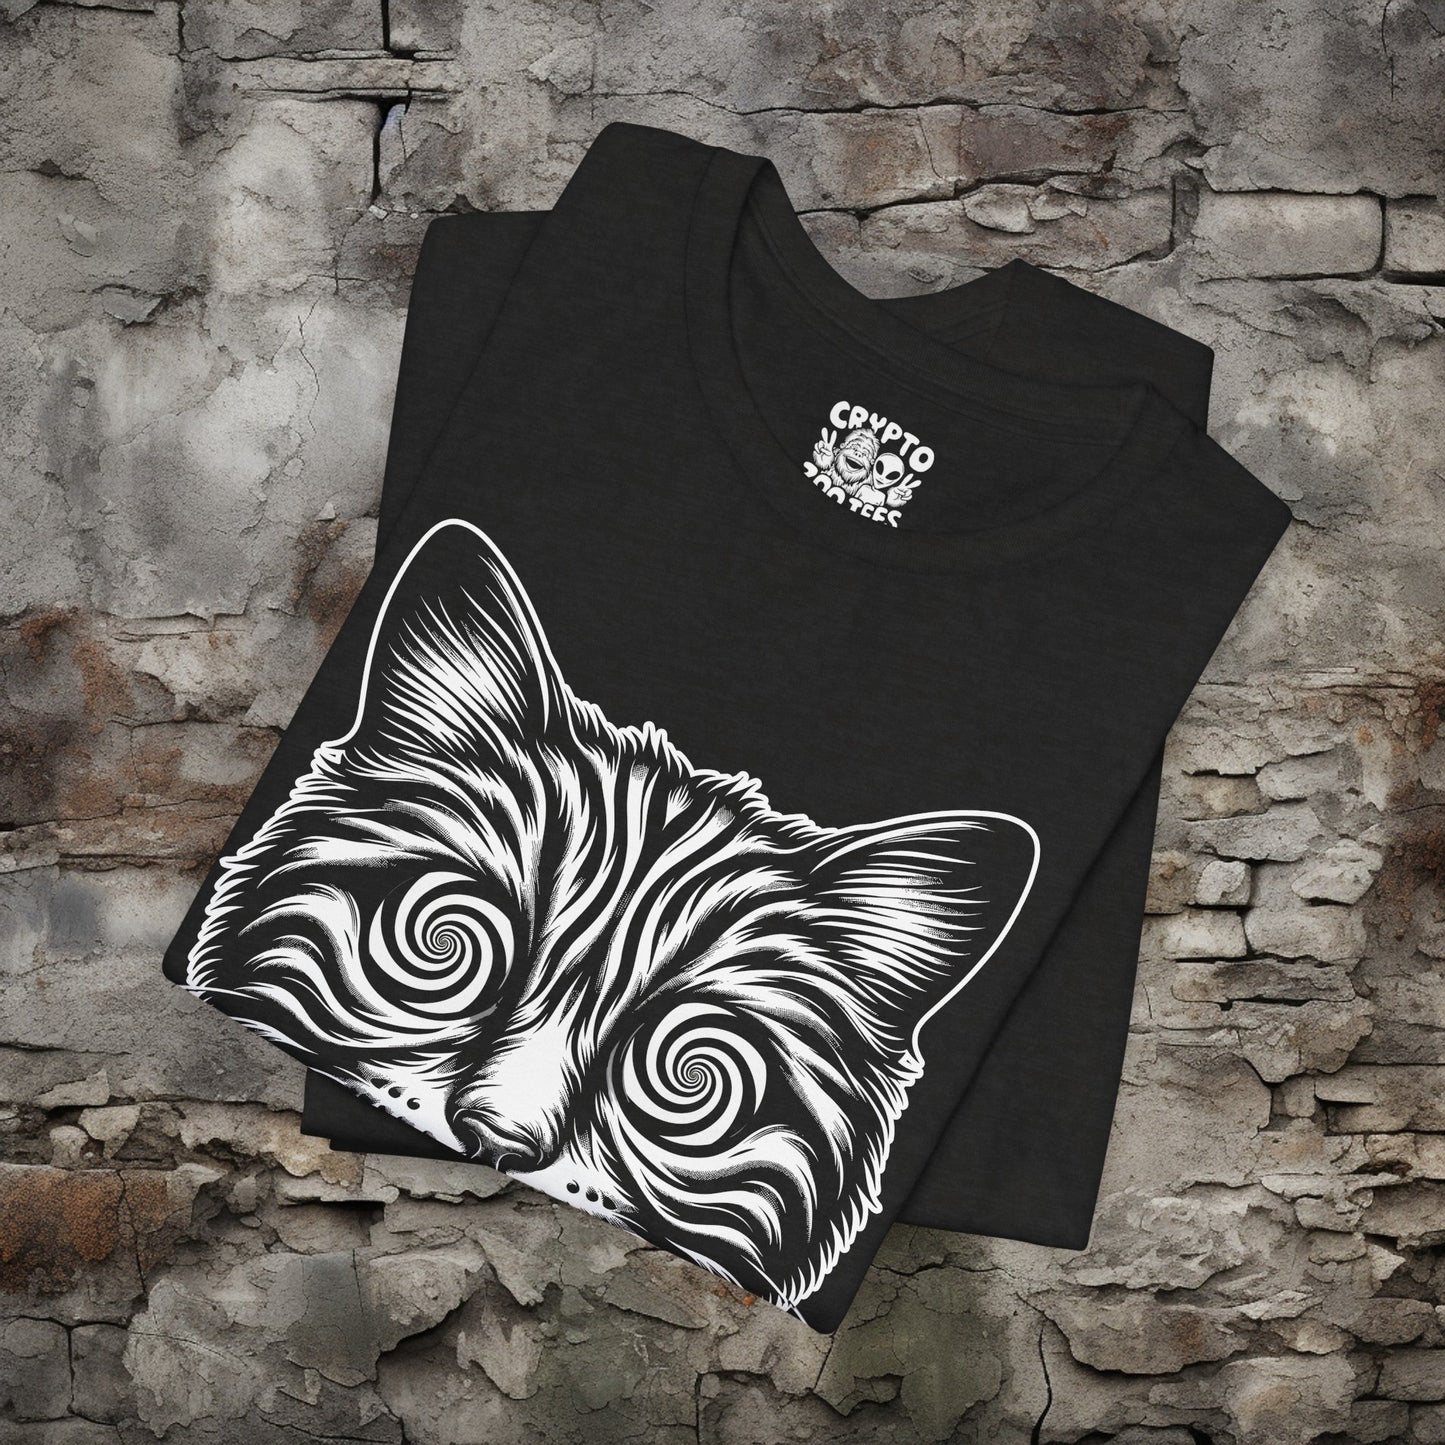 T-Shirt - Cat with Spiral Eyes Shirt | Hypnotized Trippy Tee | Bella + Canvas Unisex T-shirt from Crypto Zoo Tees